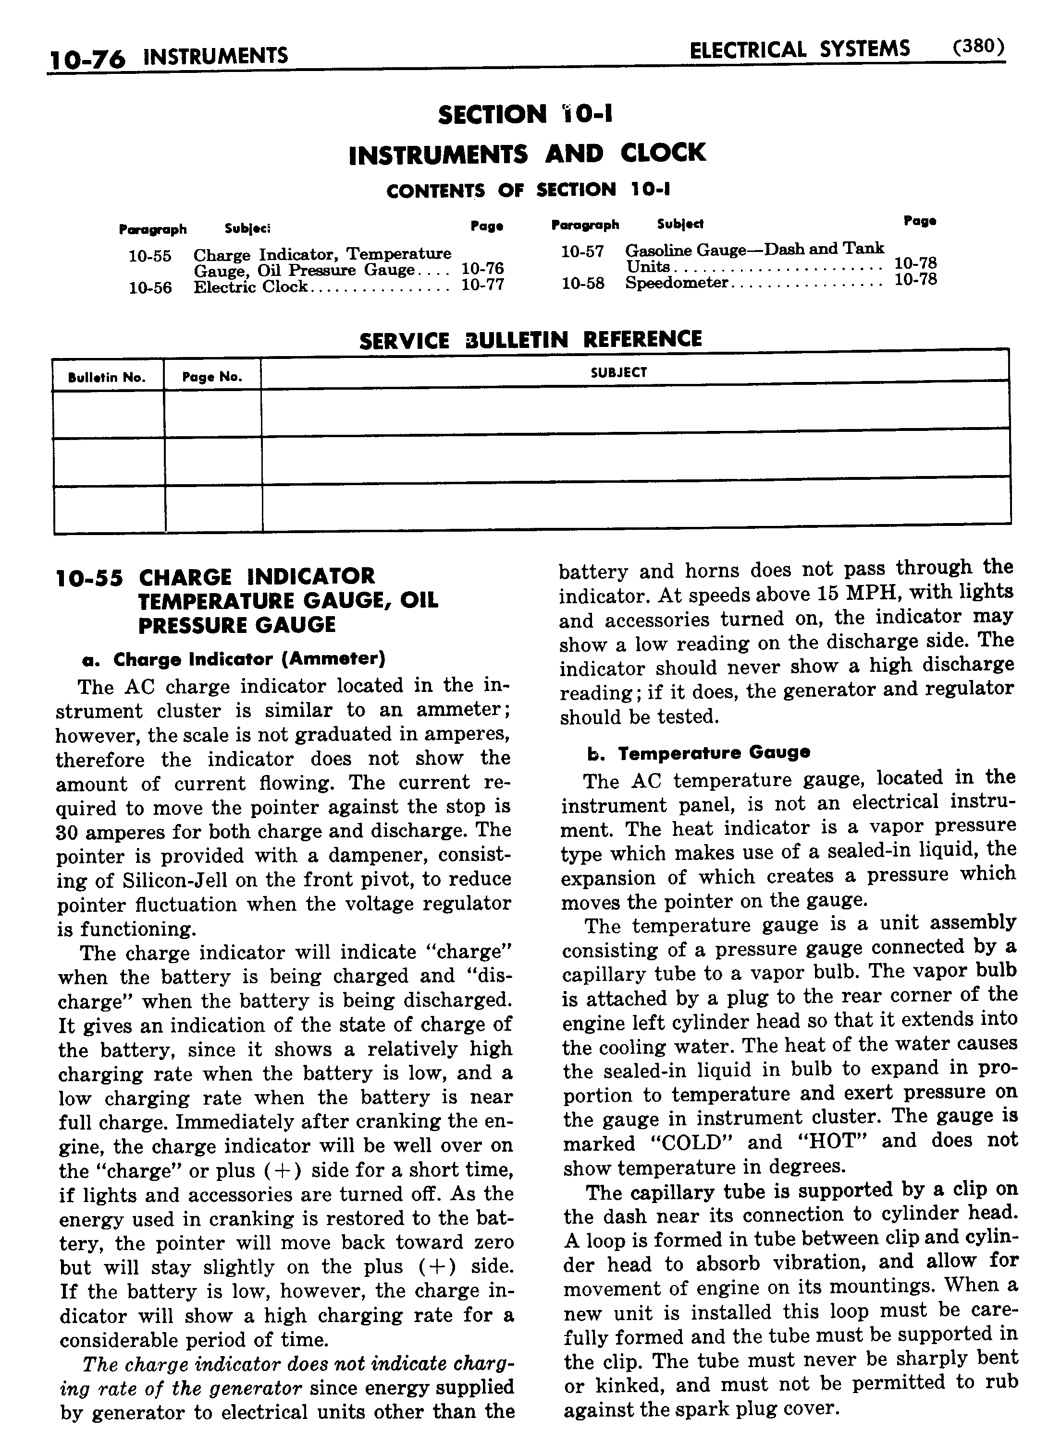 n_11 1955 Buick Shop Manual - Electrical Systems-076-076.jpg